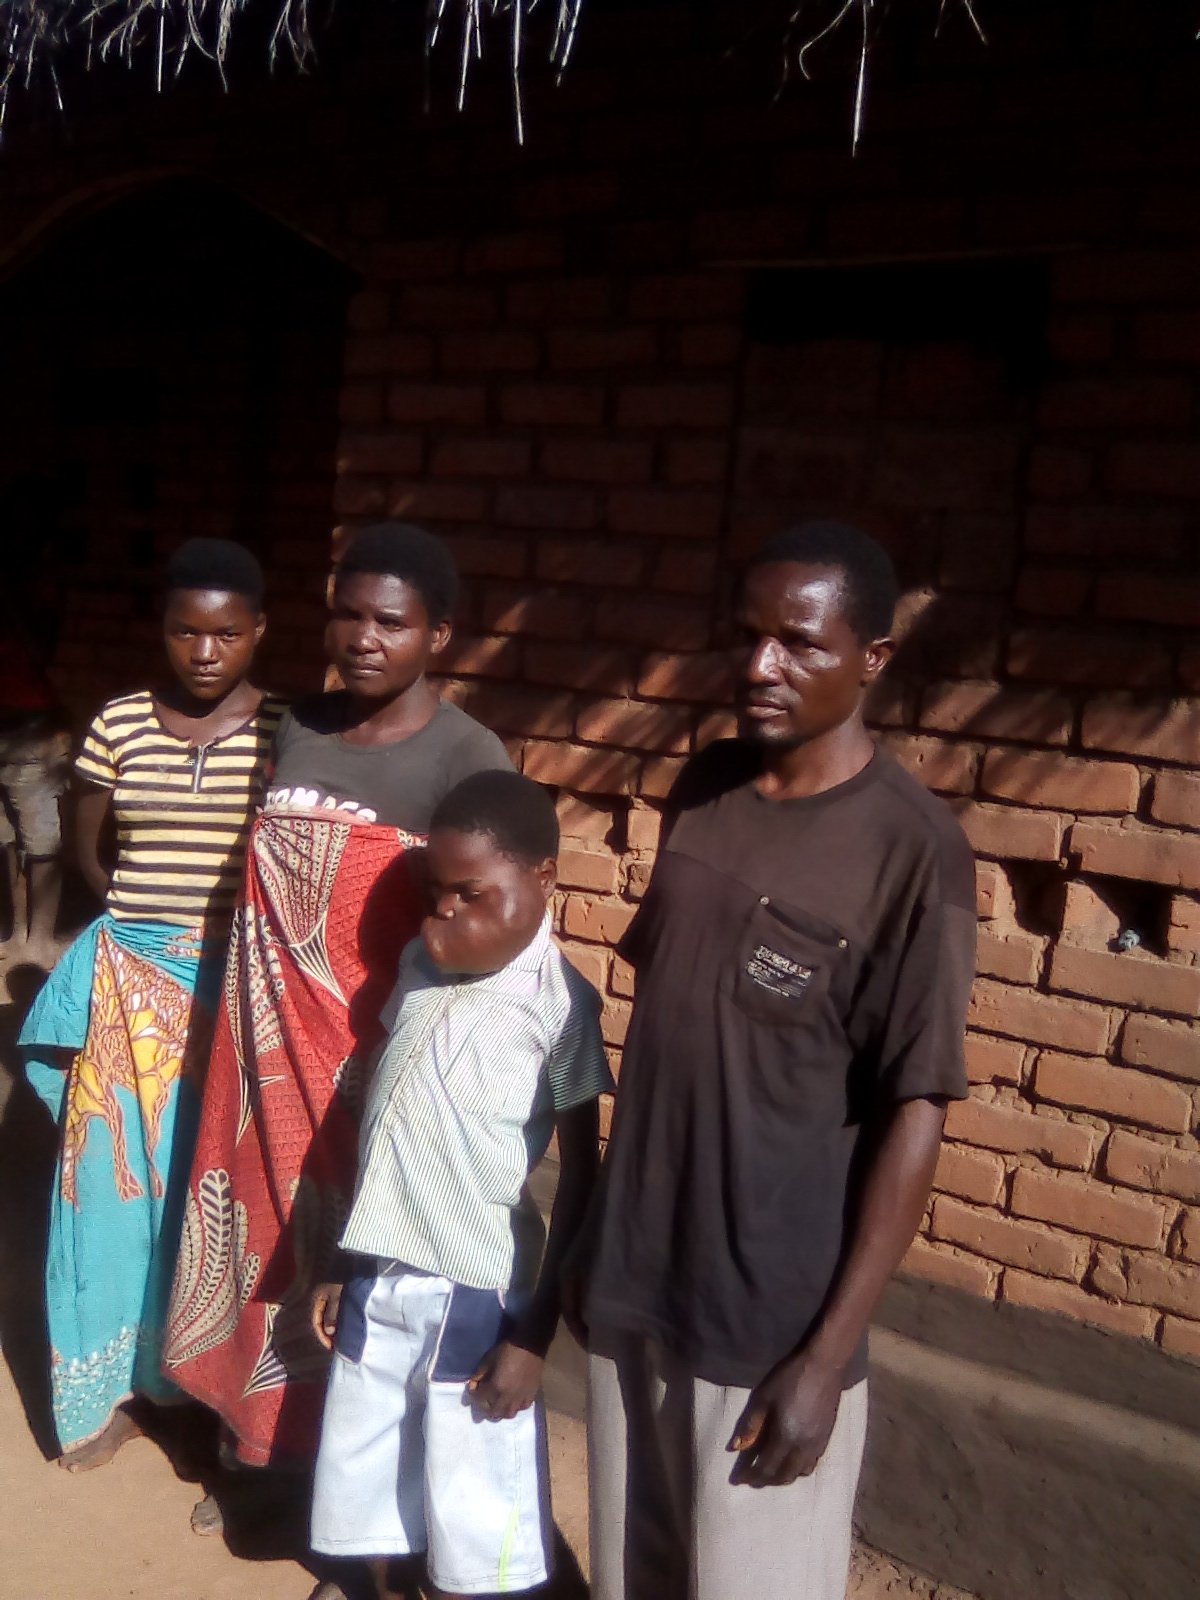 Mphatso stands with his family in front of their home in Mozambique.